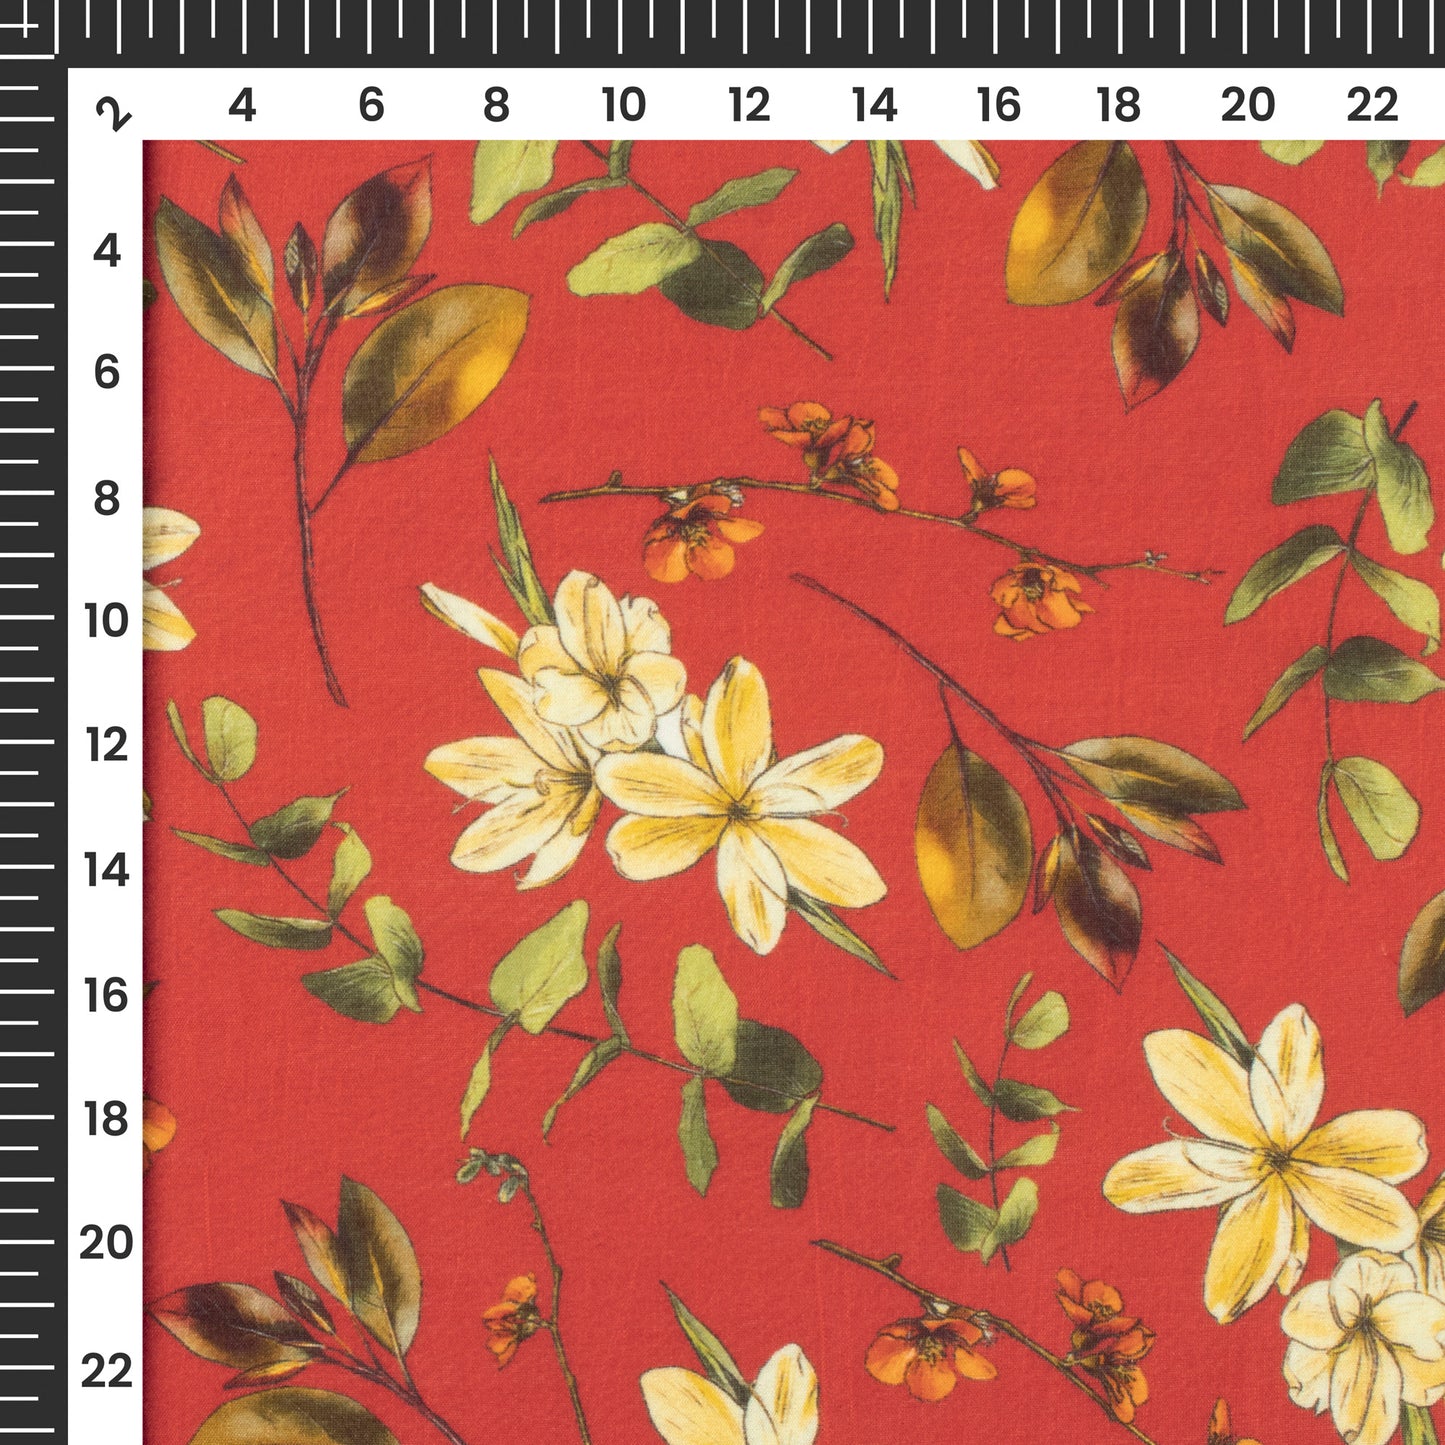 Burgundy Red Floral Printed Sustainable Orange Fabric